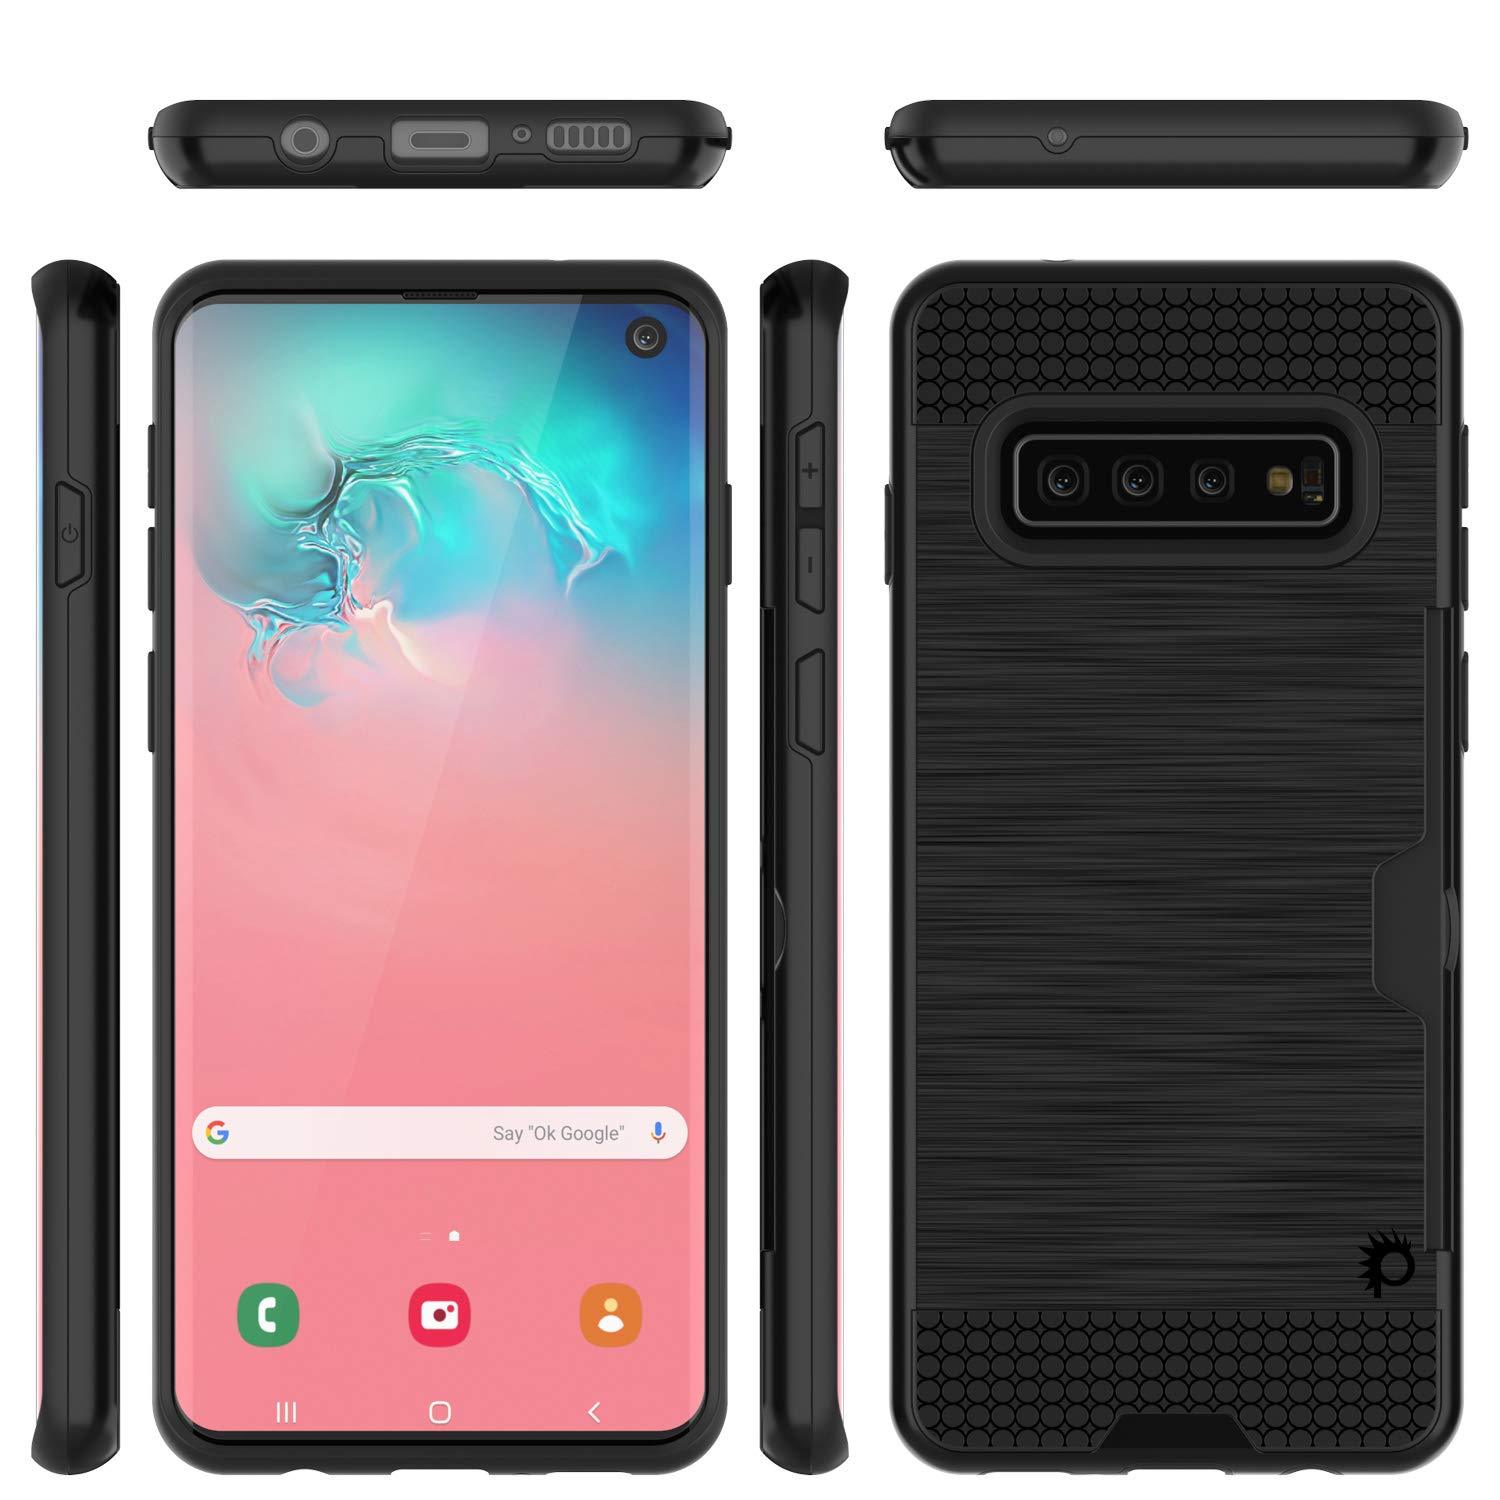 Galaxy S10e Case, PUNKcase [SLOT Series] [Slim Fit] Dual-Layer Armor Cover w/Integrated Anti-Shock System, Credit Card Slot [Black]